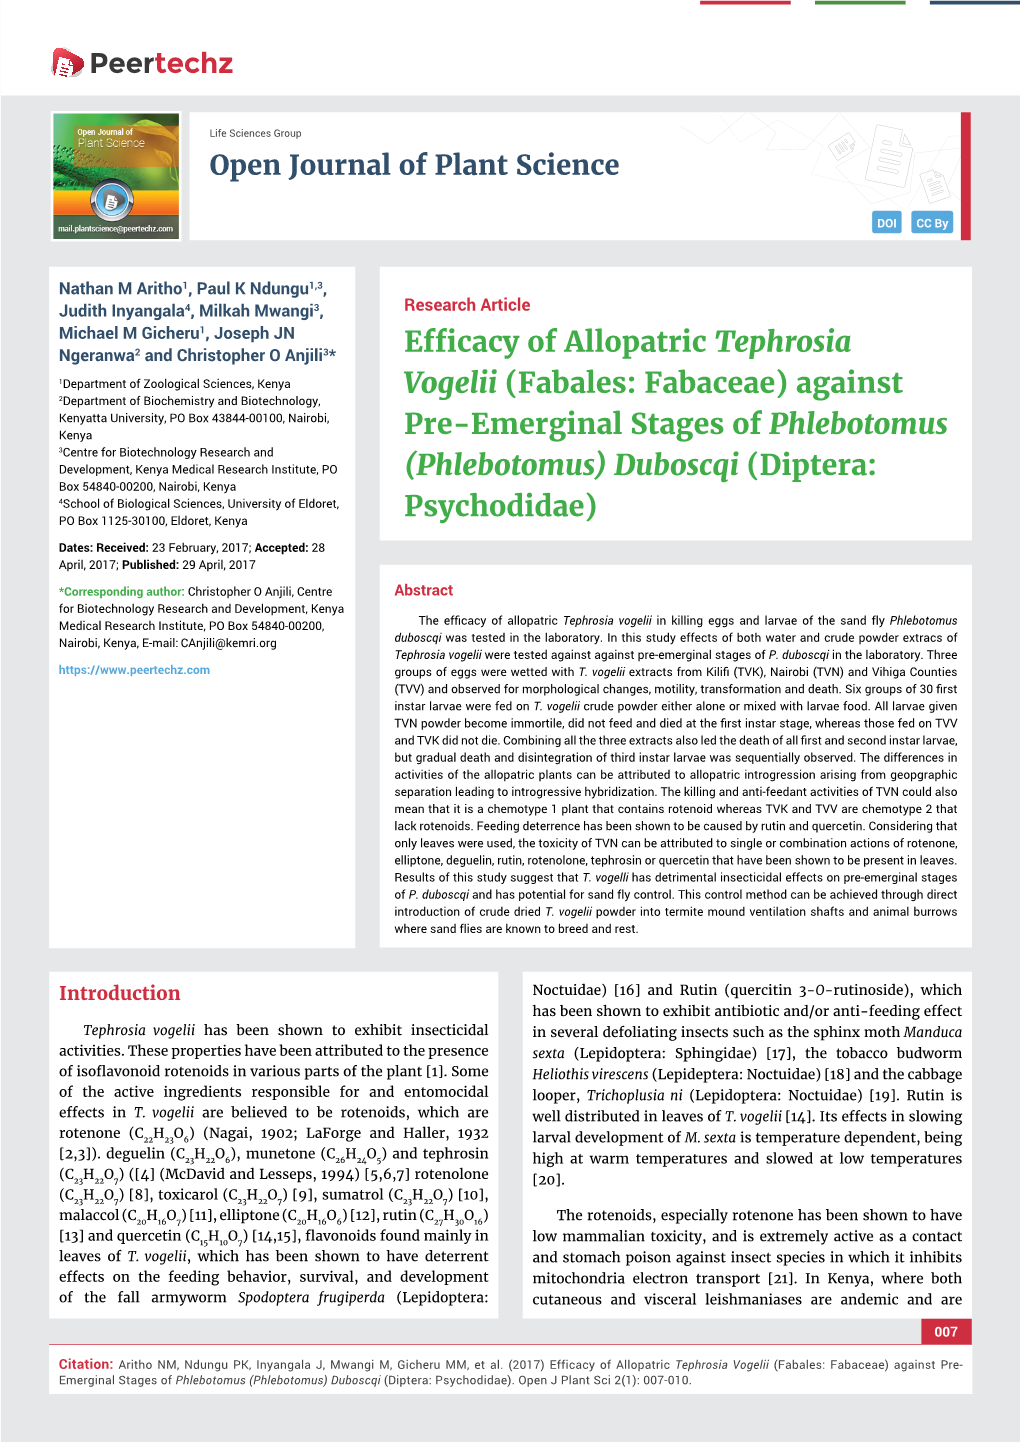 Efficacy of Allopatric Tephrosia Vogelii (Fabales: Fabaceae) Against Pre- Emerginal Stages of Phlebotomus (Phlebotomus) Duboscqi (Diptera: Psychodidae)